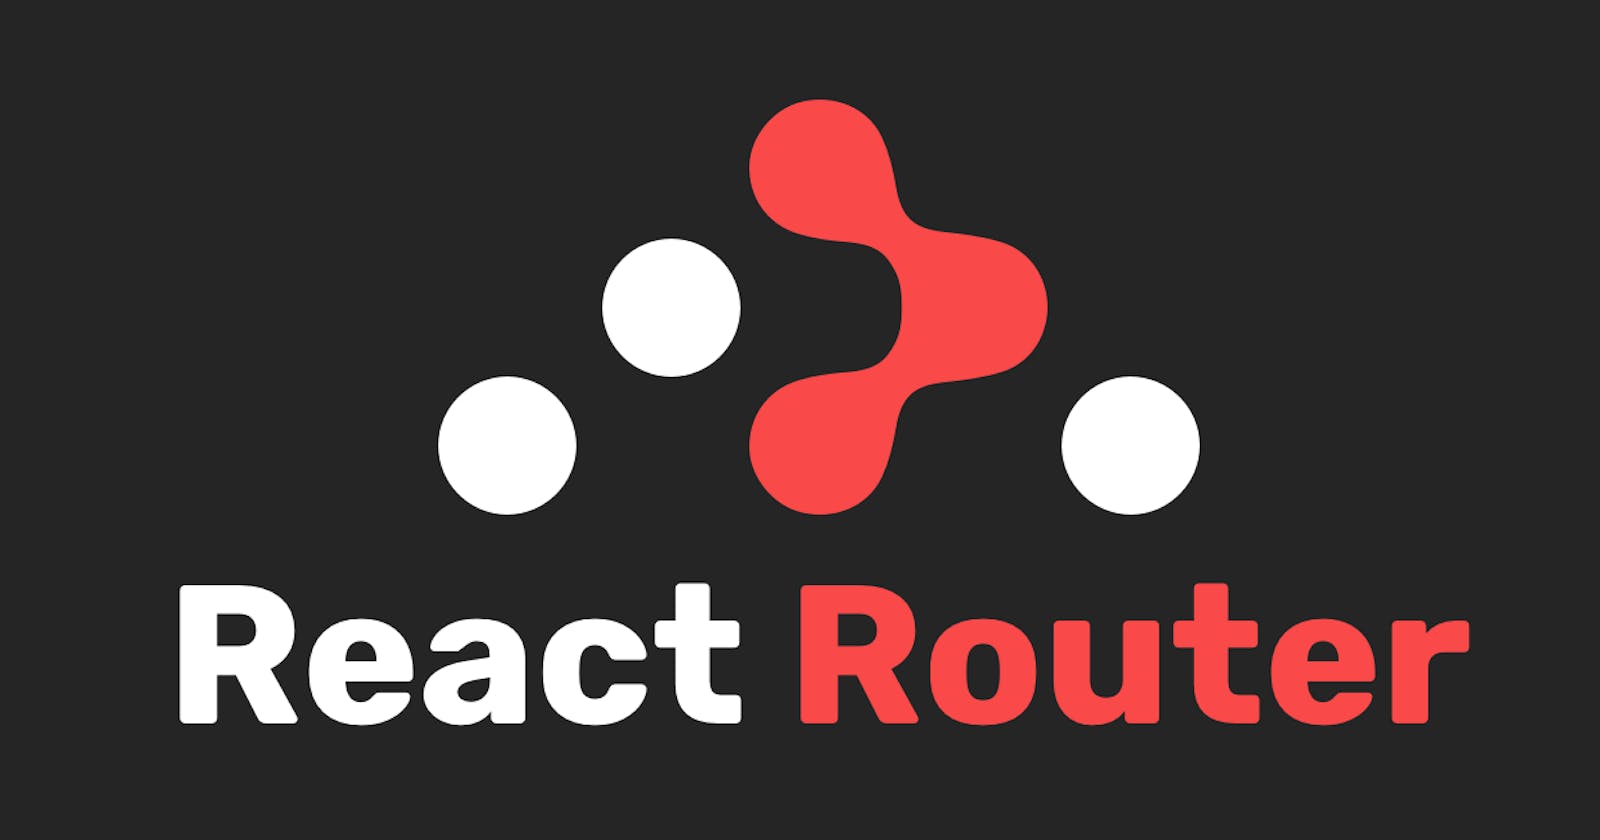 Getting started with react routers